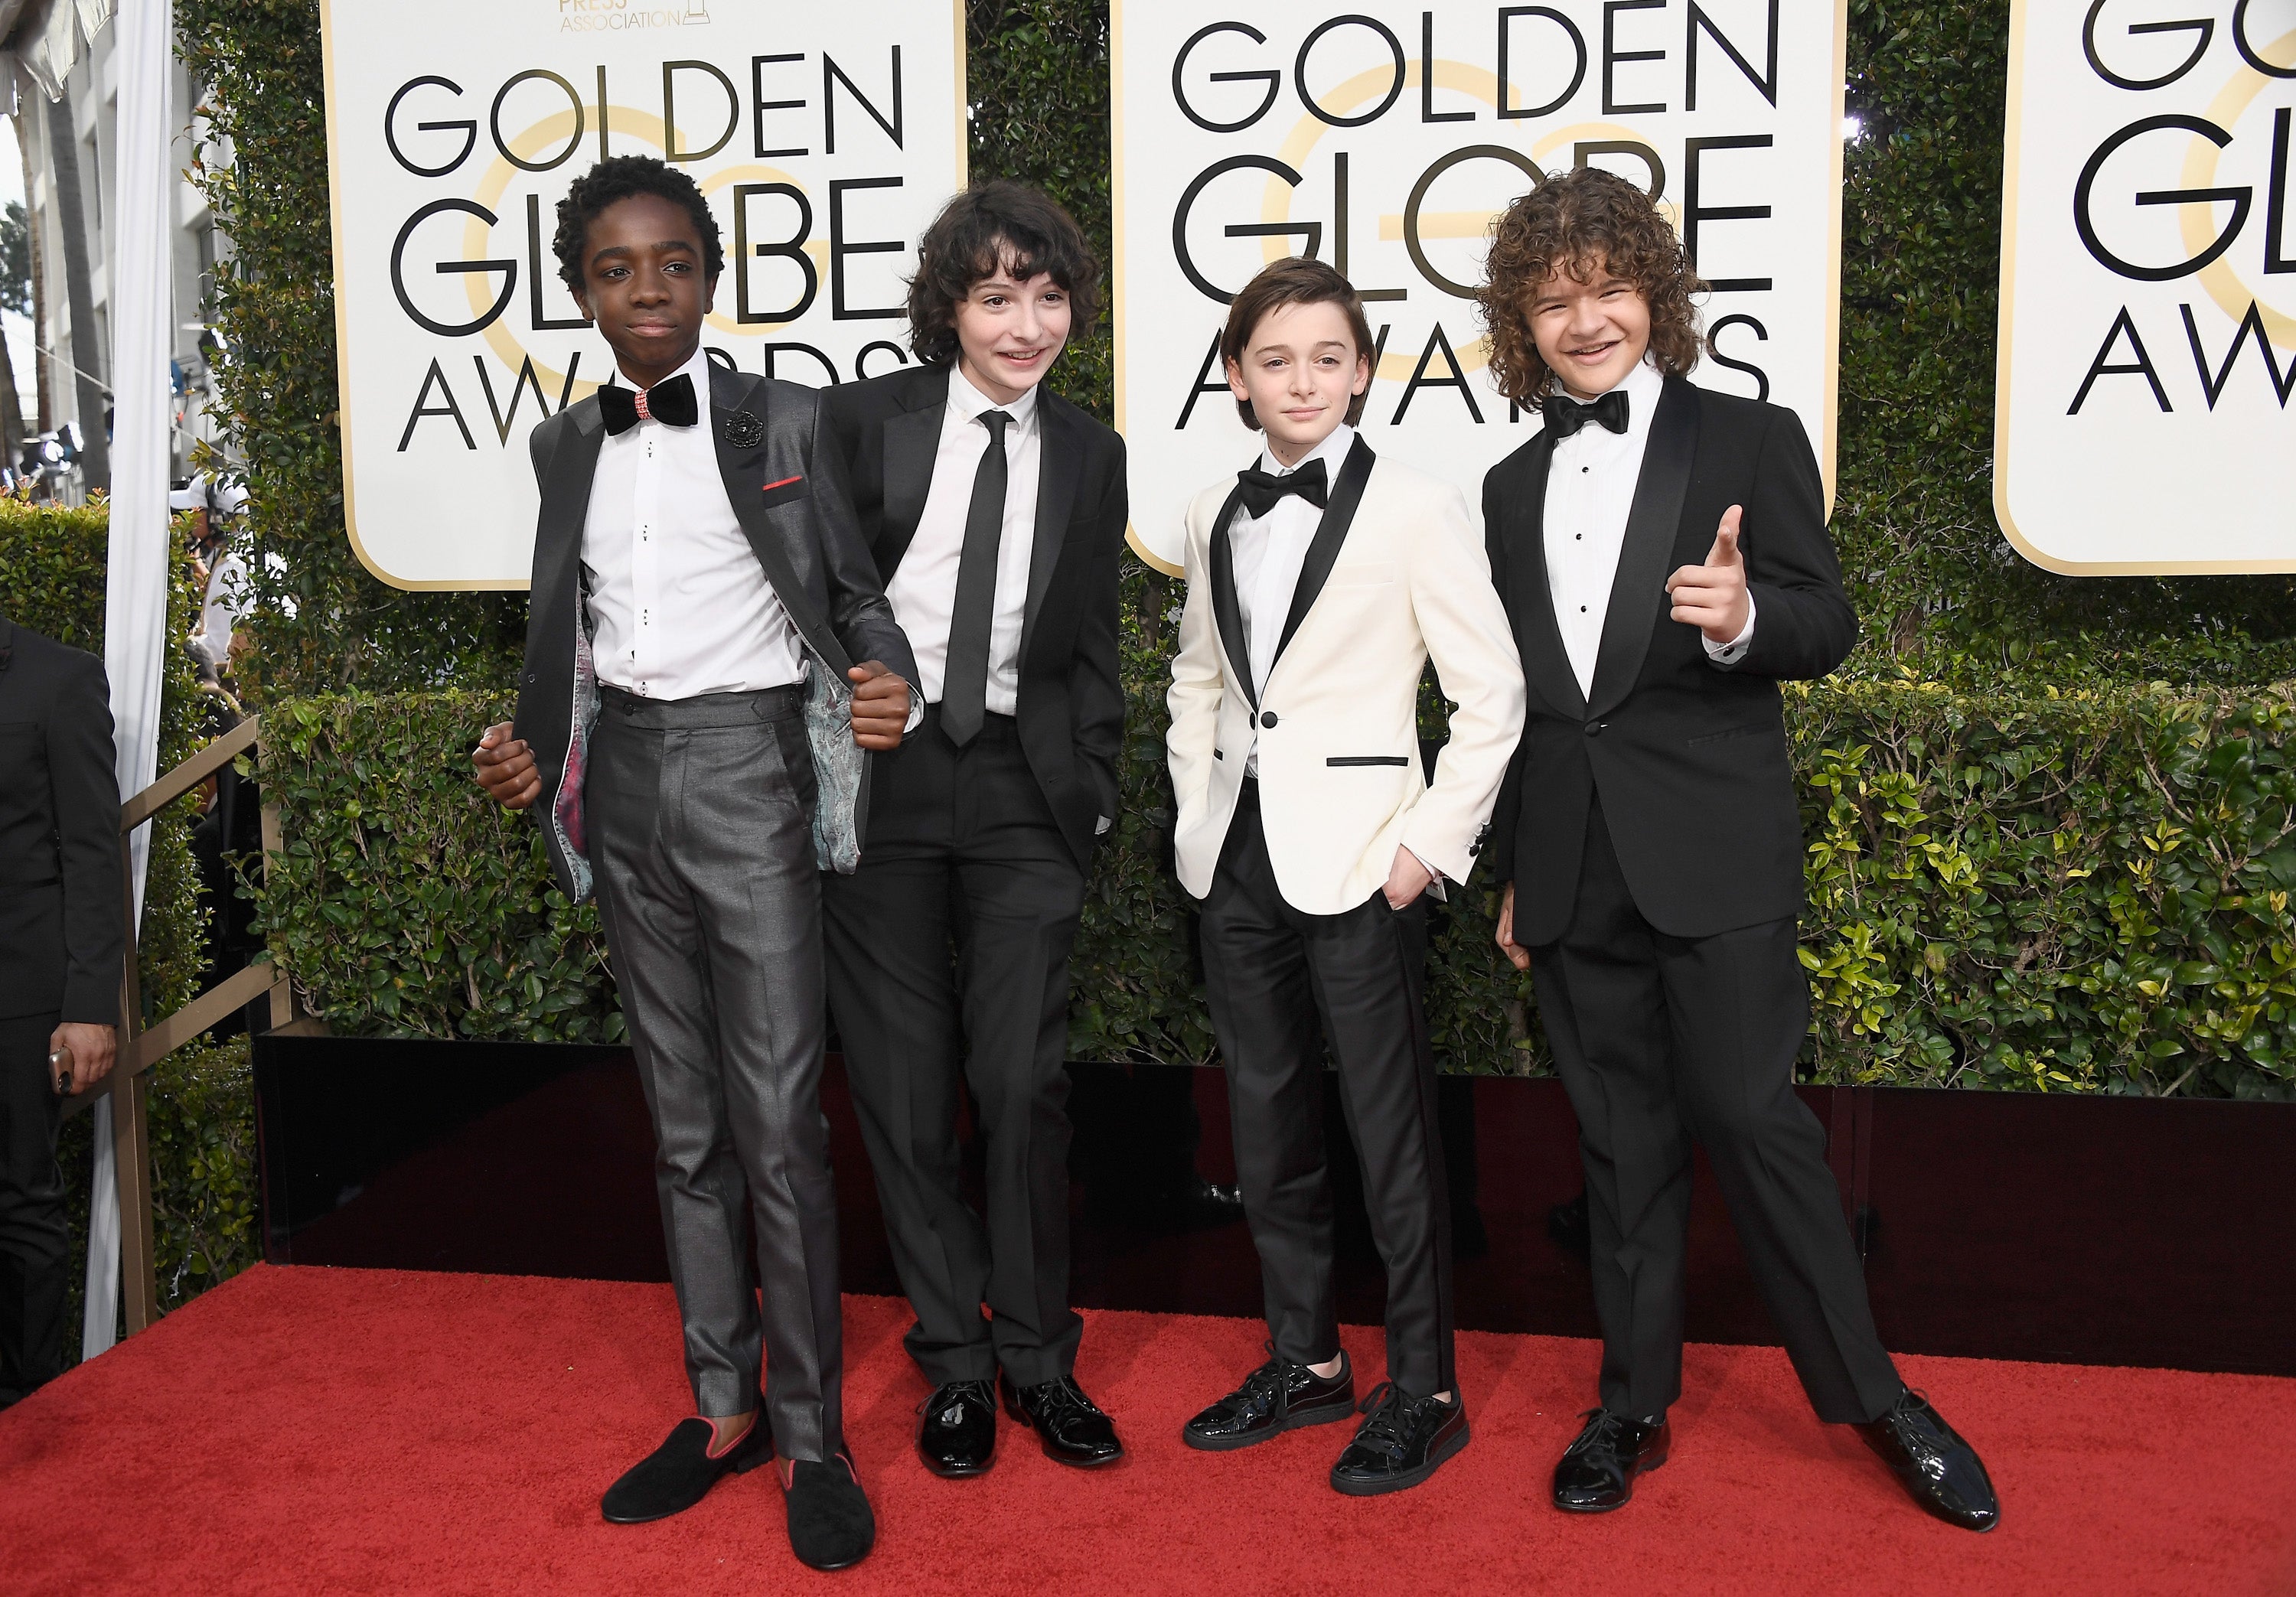 You Won't Believe How On Fire the Golden Globes Red Carpet Was
